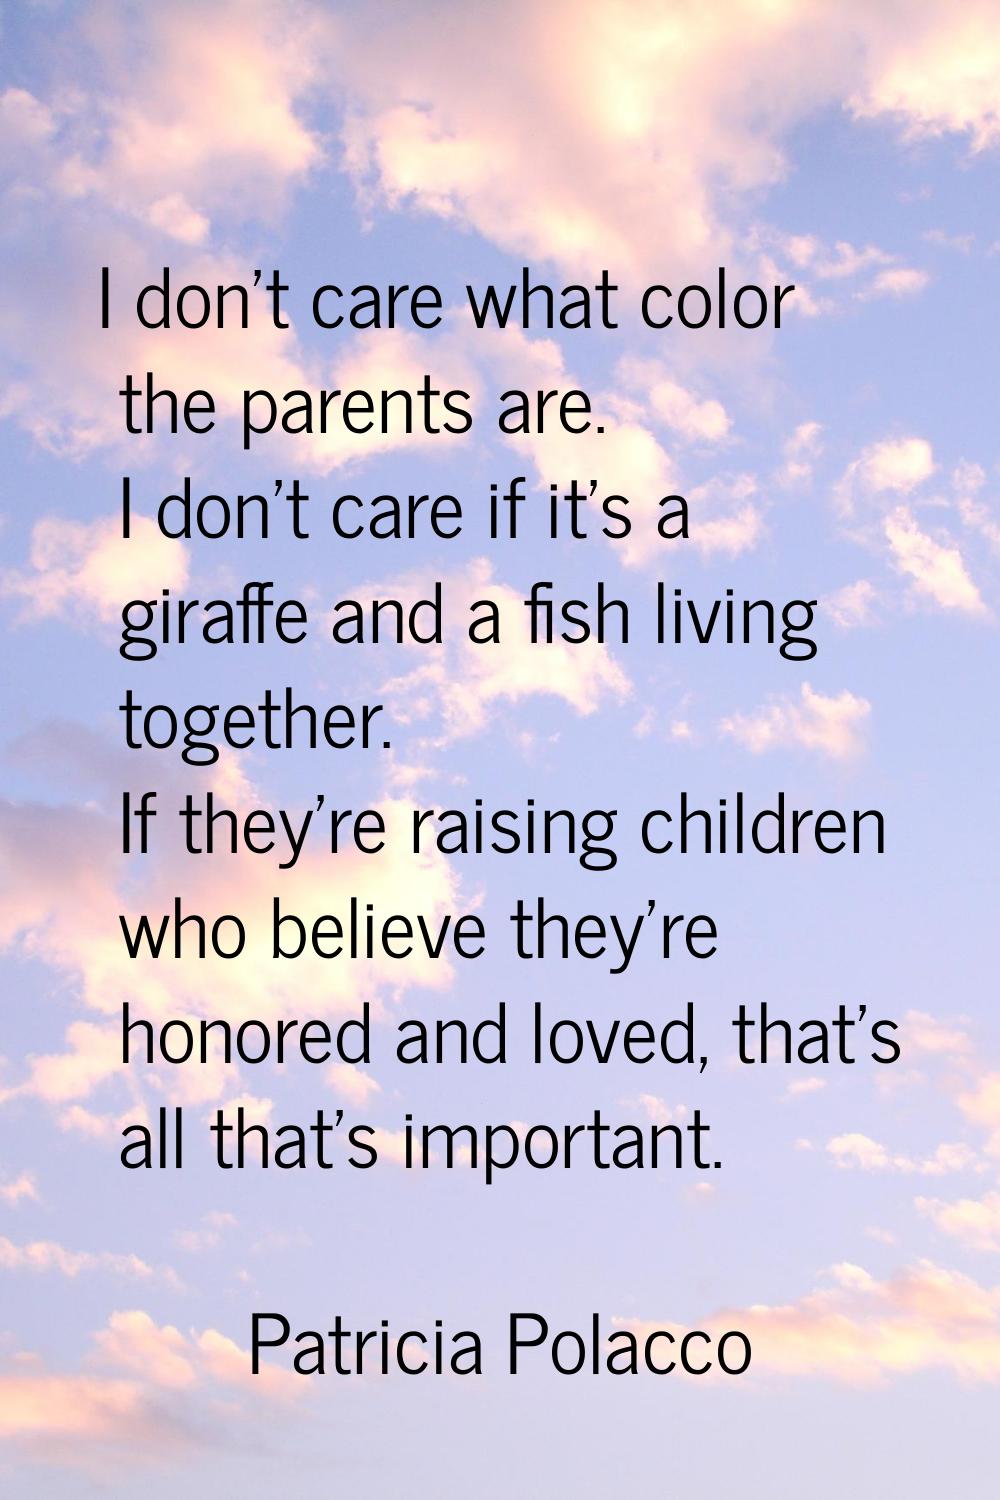 I don't care what color the parents are. I don't care if it's a giraffe and a fish living together.